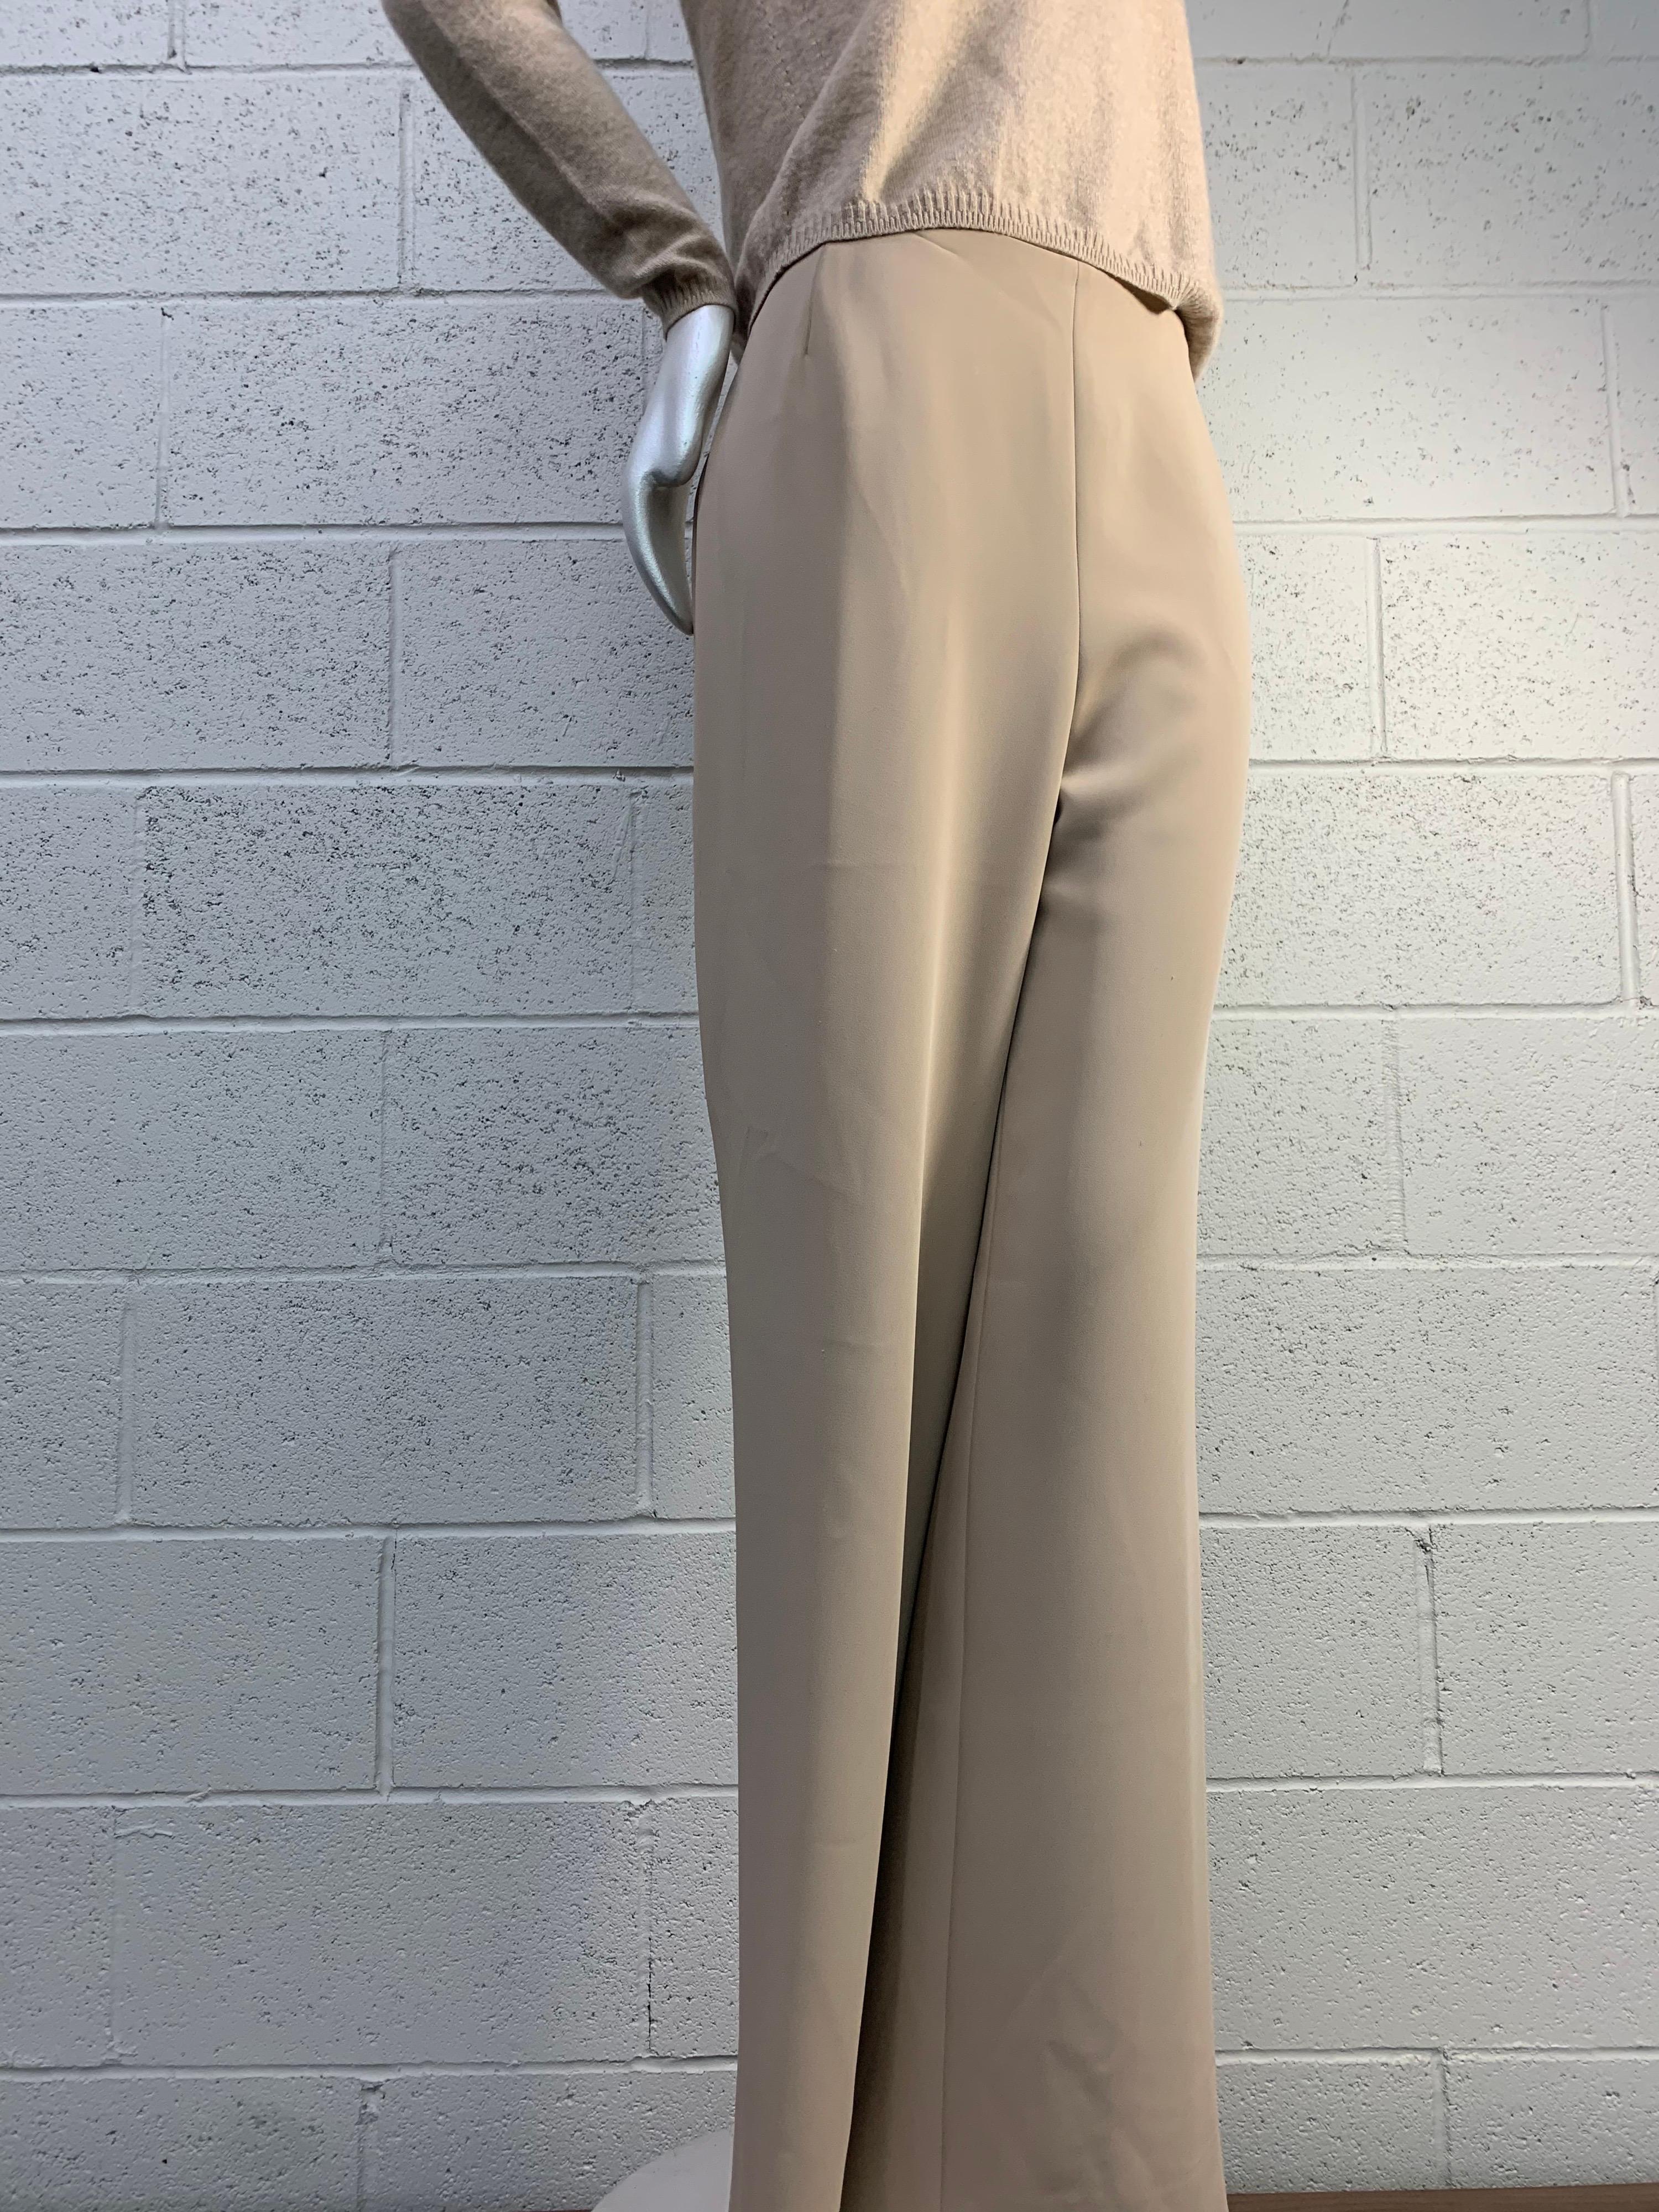 Women's 2000s Chanel Wide-Leg Flat Front Camel-Toned Trousers w/ Cashmere Pullover